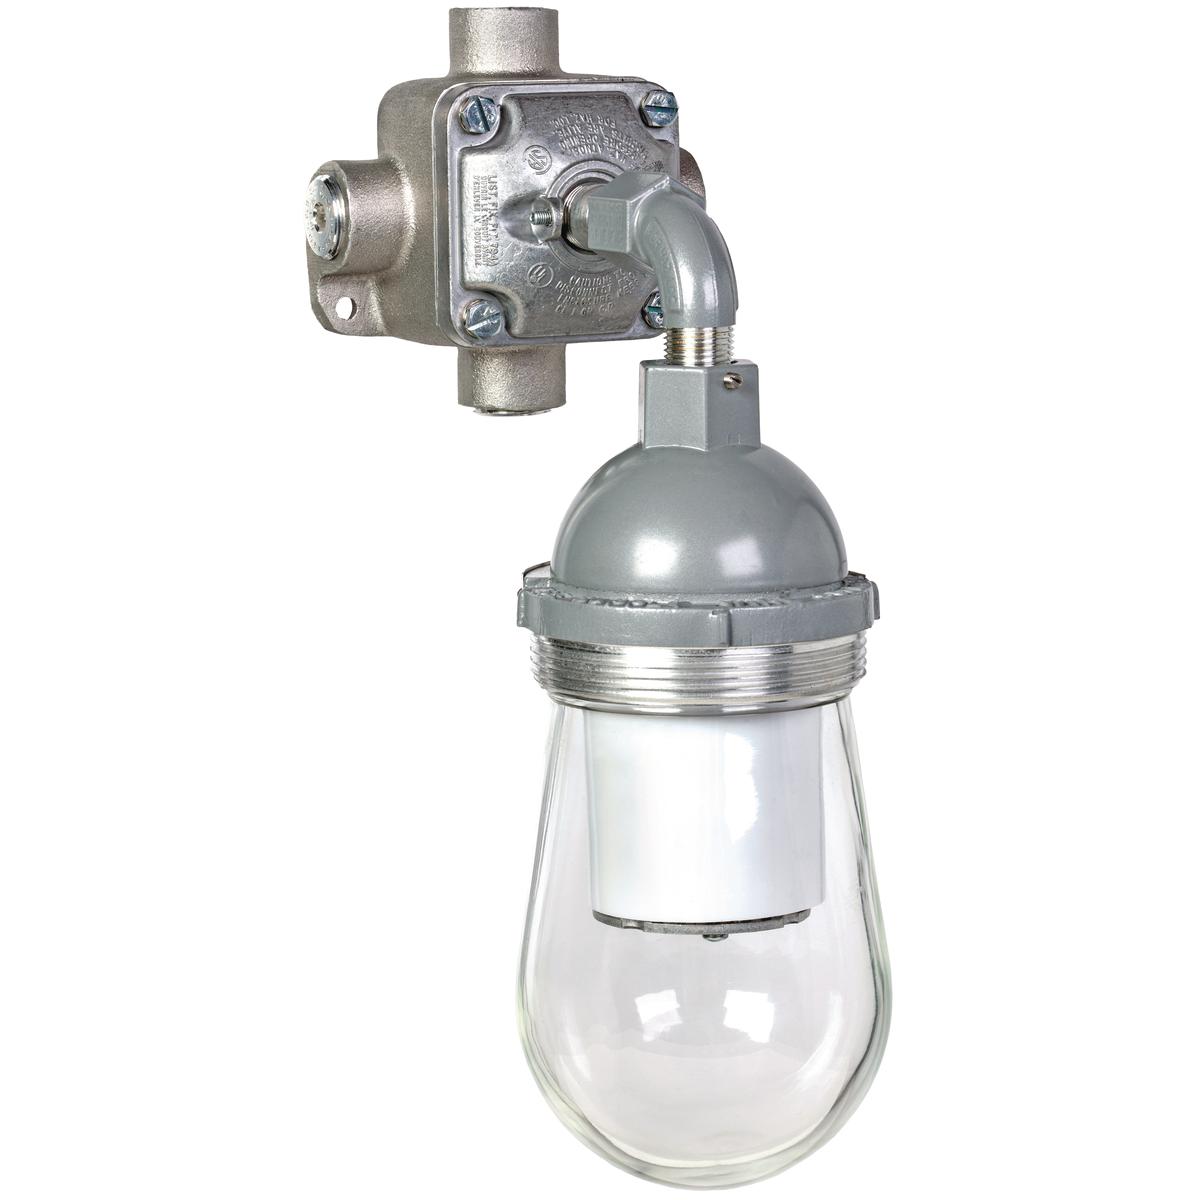 Hubbell DVL1330B1G The DVL Series is a Dust Tight/ Utility fixture using energy efficient LED's. This fixture is made with a cast copper-free aluminum housing and mount that is  suitable for harsh and hazardous environments. With the design of this fixtures internal heat si